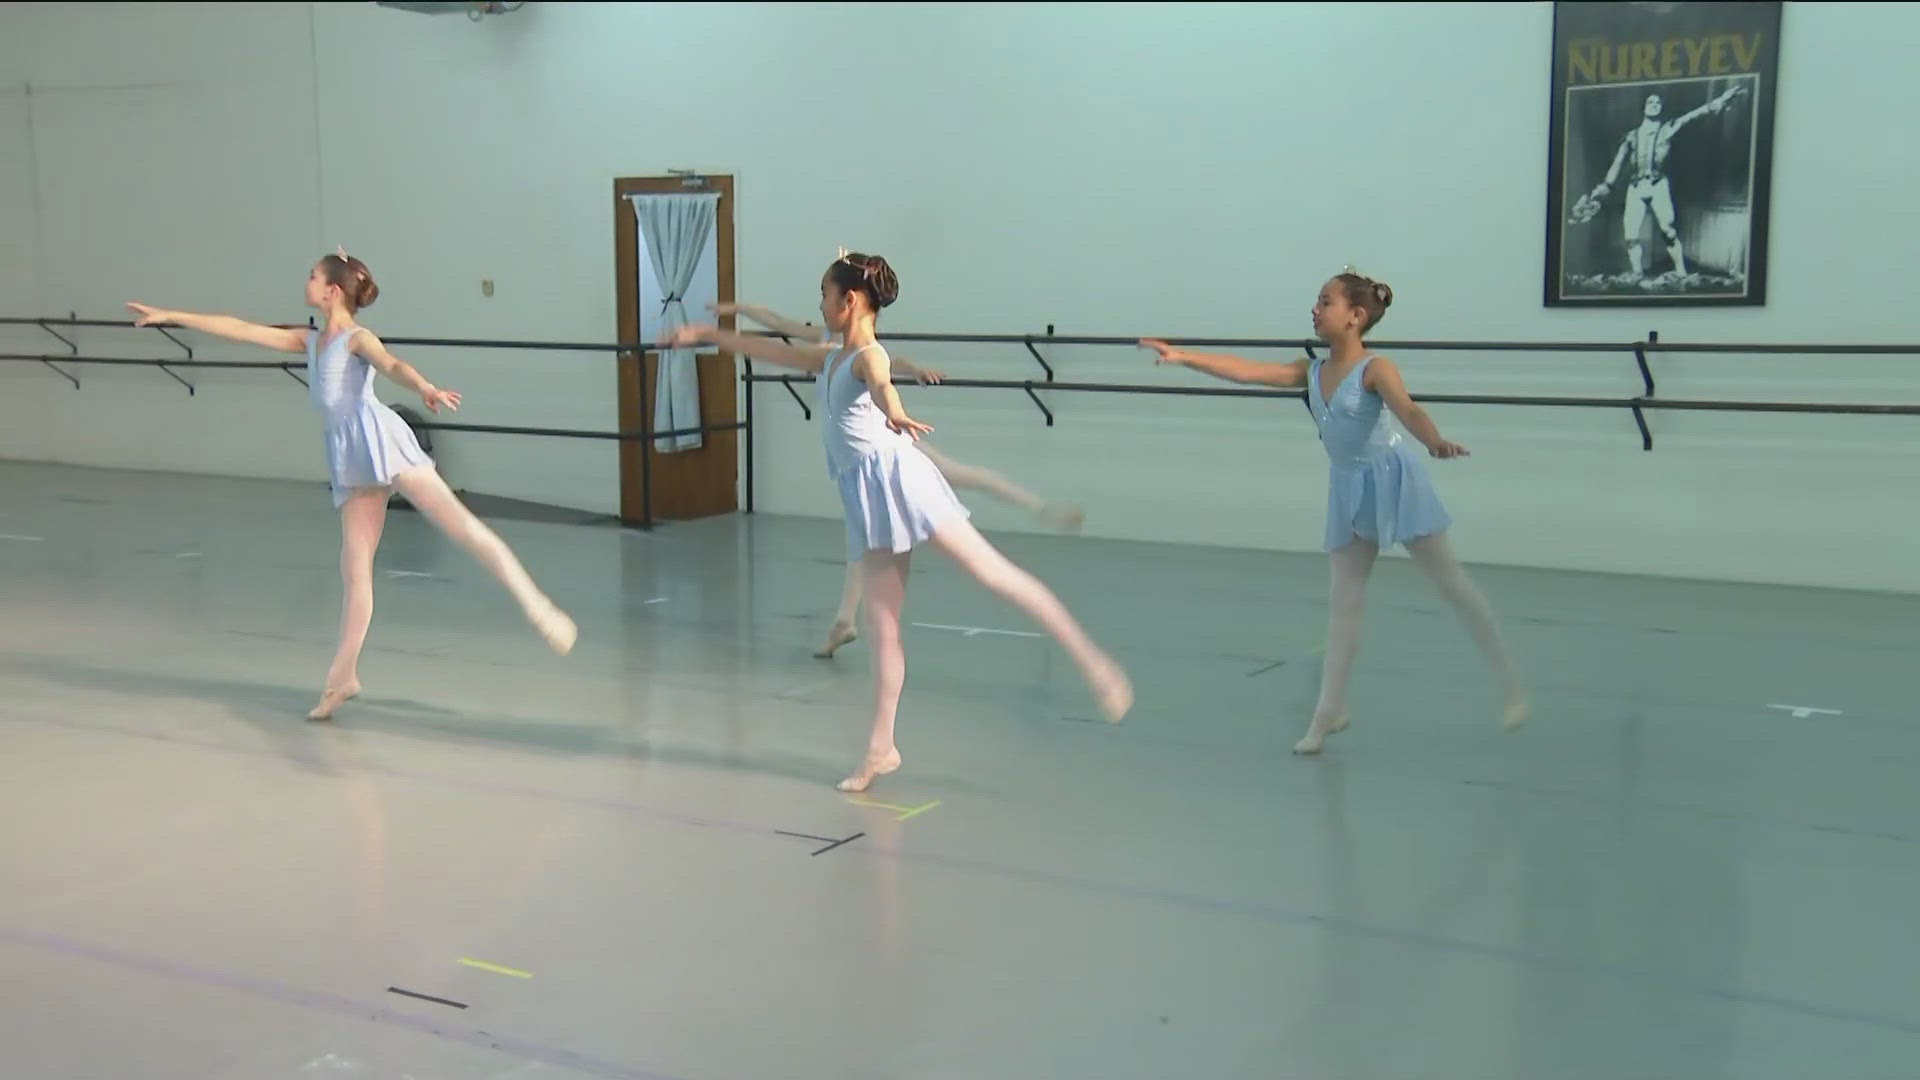 San Diego Academy of Ballet and Theatre Performance provides professional training and coaching to dancers without the competitions. sandiegoacademeyofballet.org